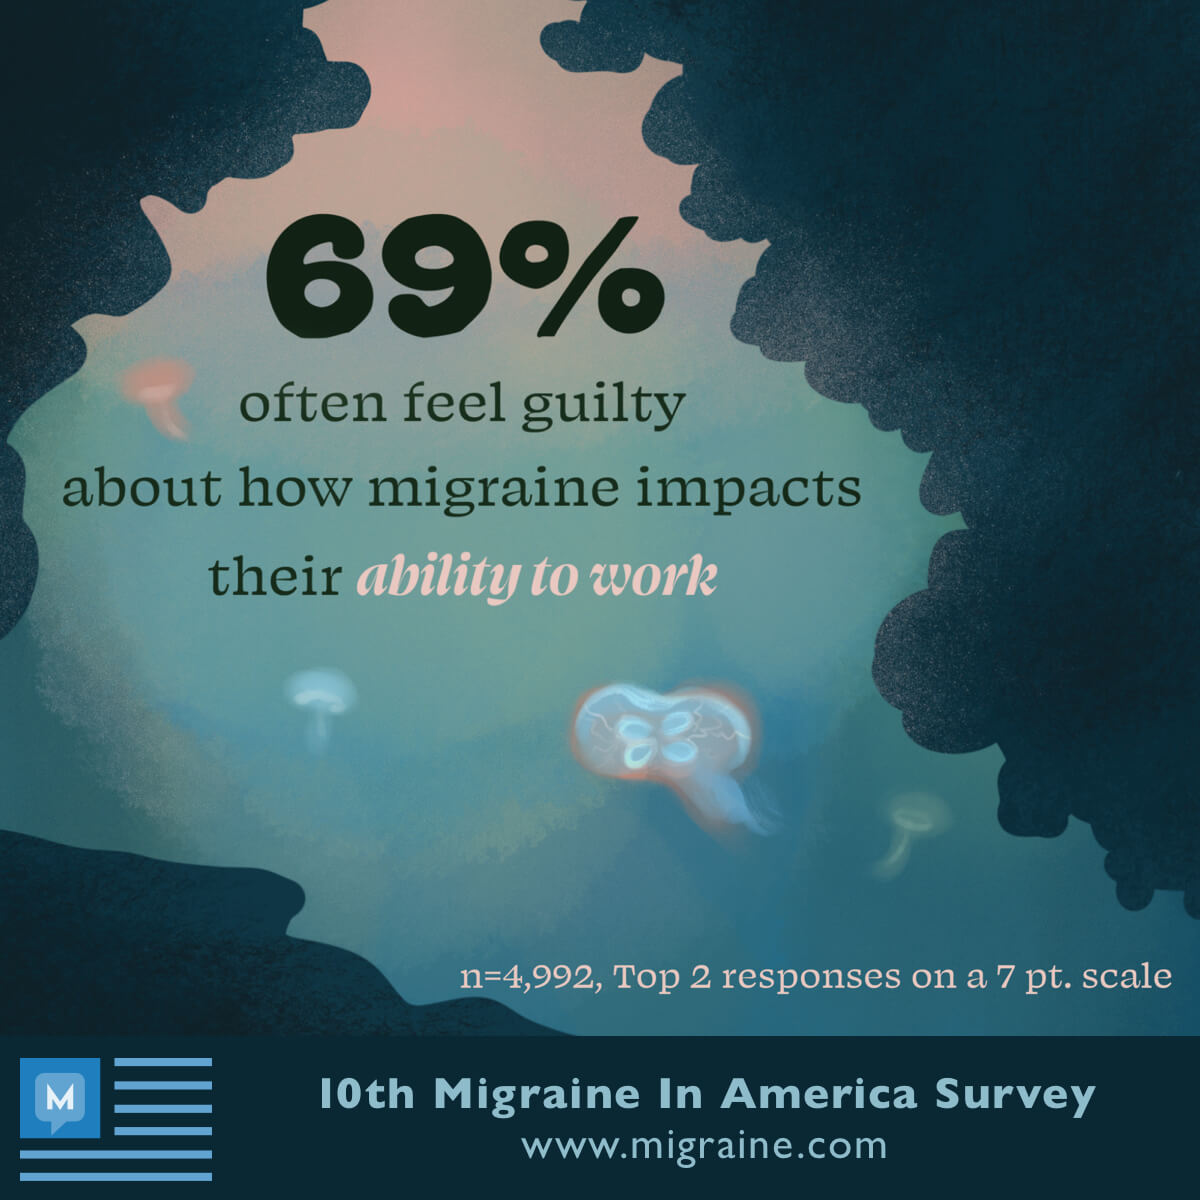 69% of Migraine In America Survey respondents feel guilty about how migraine impacts their ability to work.